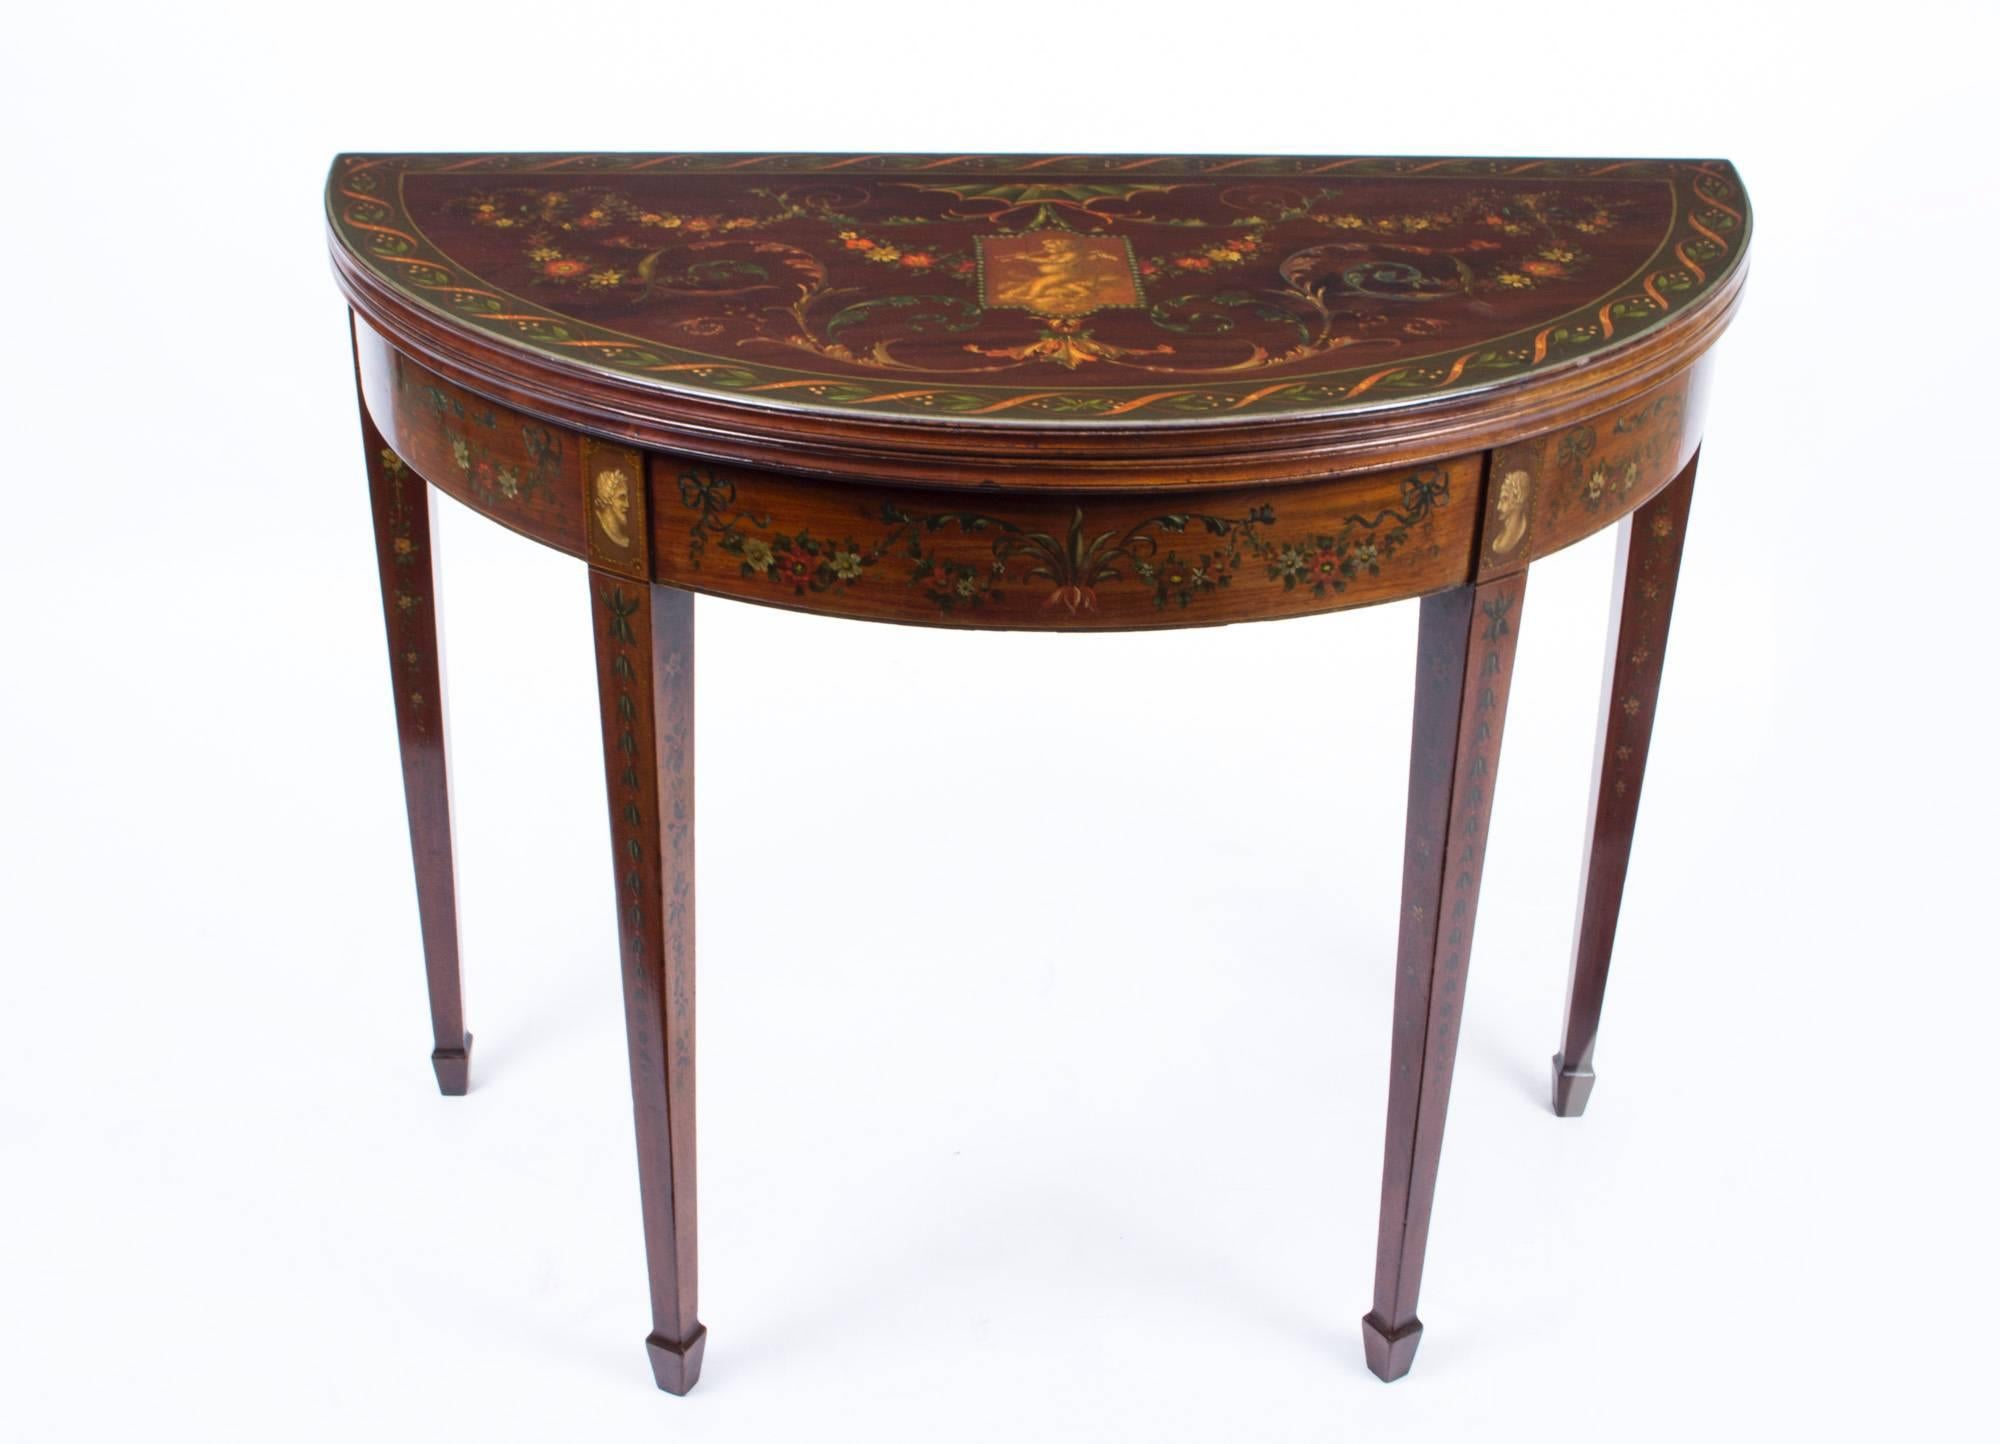 This is a beautiful antique Victorian hand-painted mahogany half moon card table, circa 1870 in date and in superb George III style..

The card table has beautiful neoclassical hand-painted decoration in the manner of Angelica Kauffman, the top